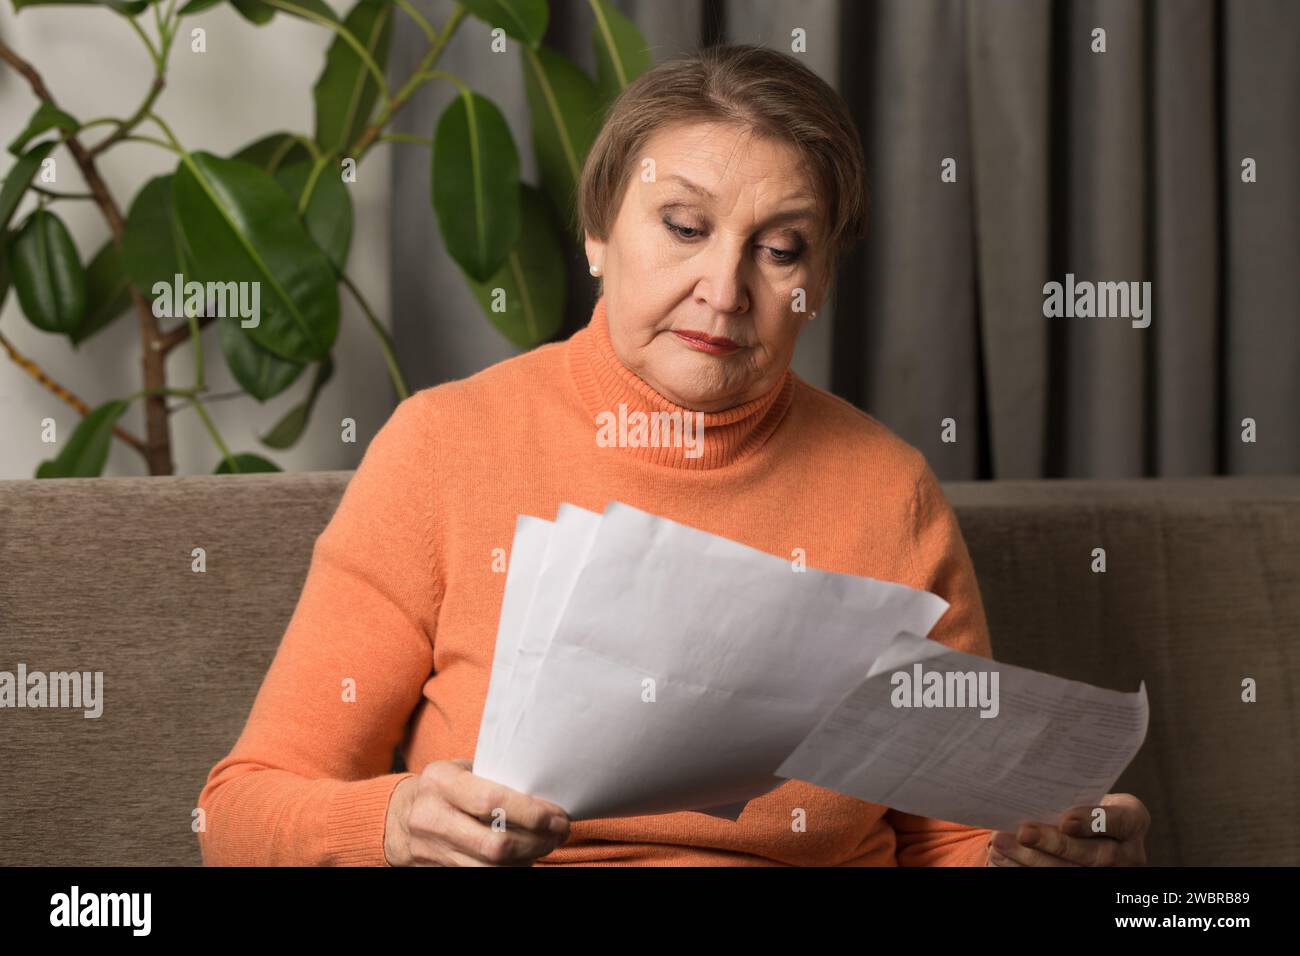 Portrait of an old woman looking at bills while Stock Photo